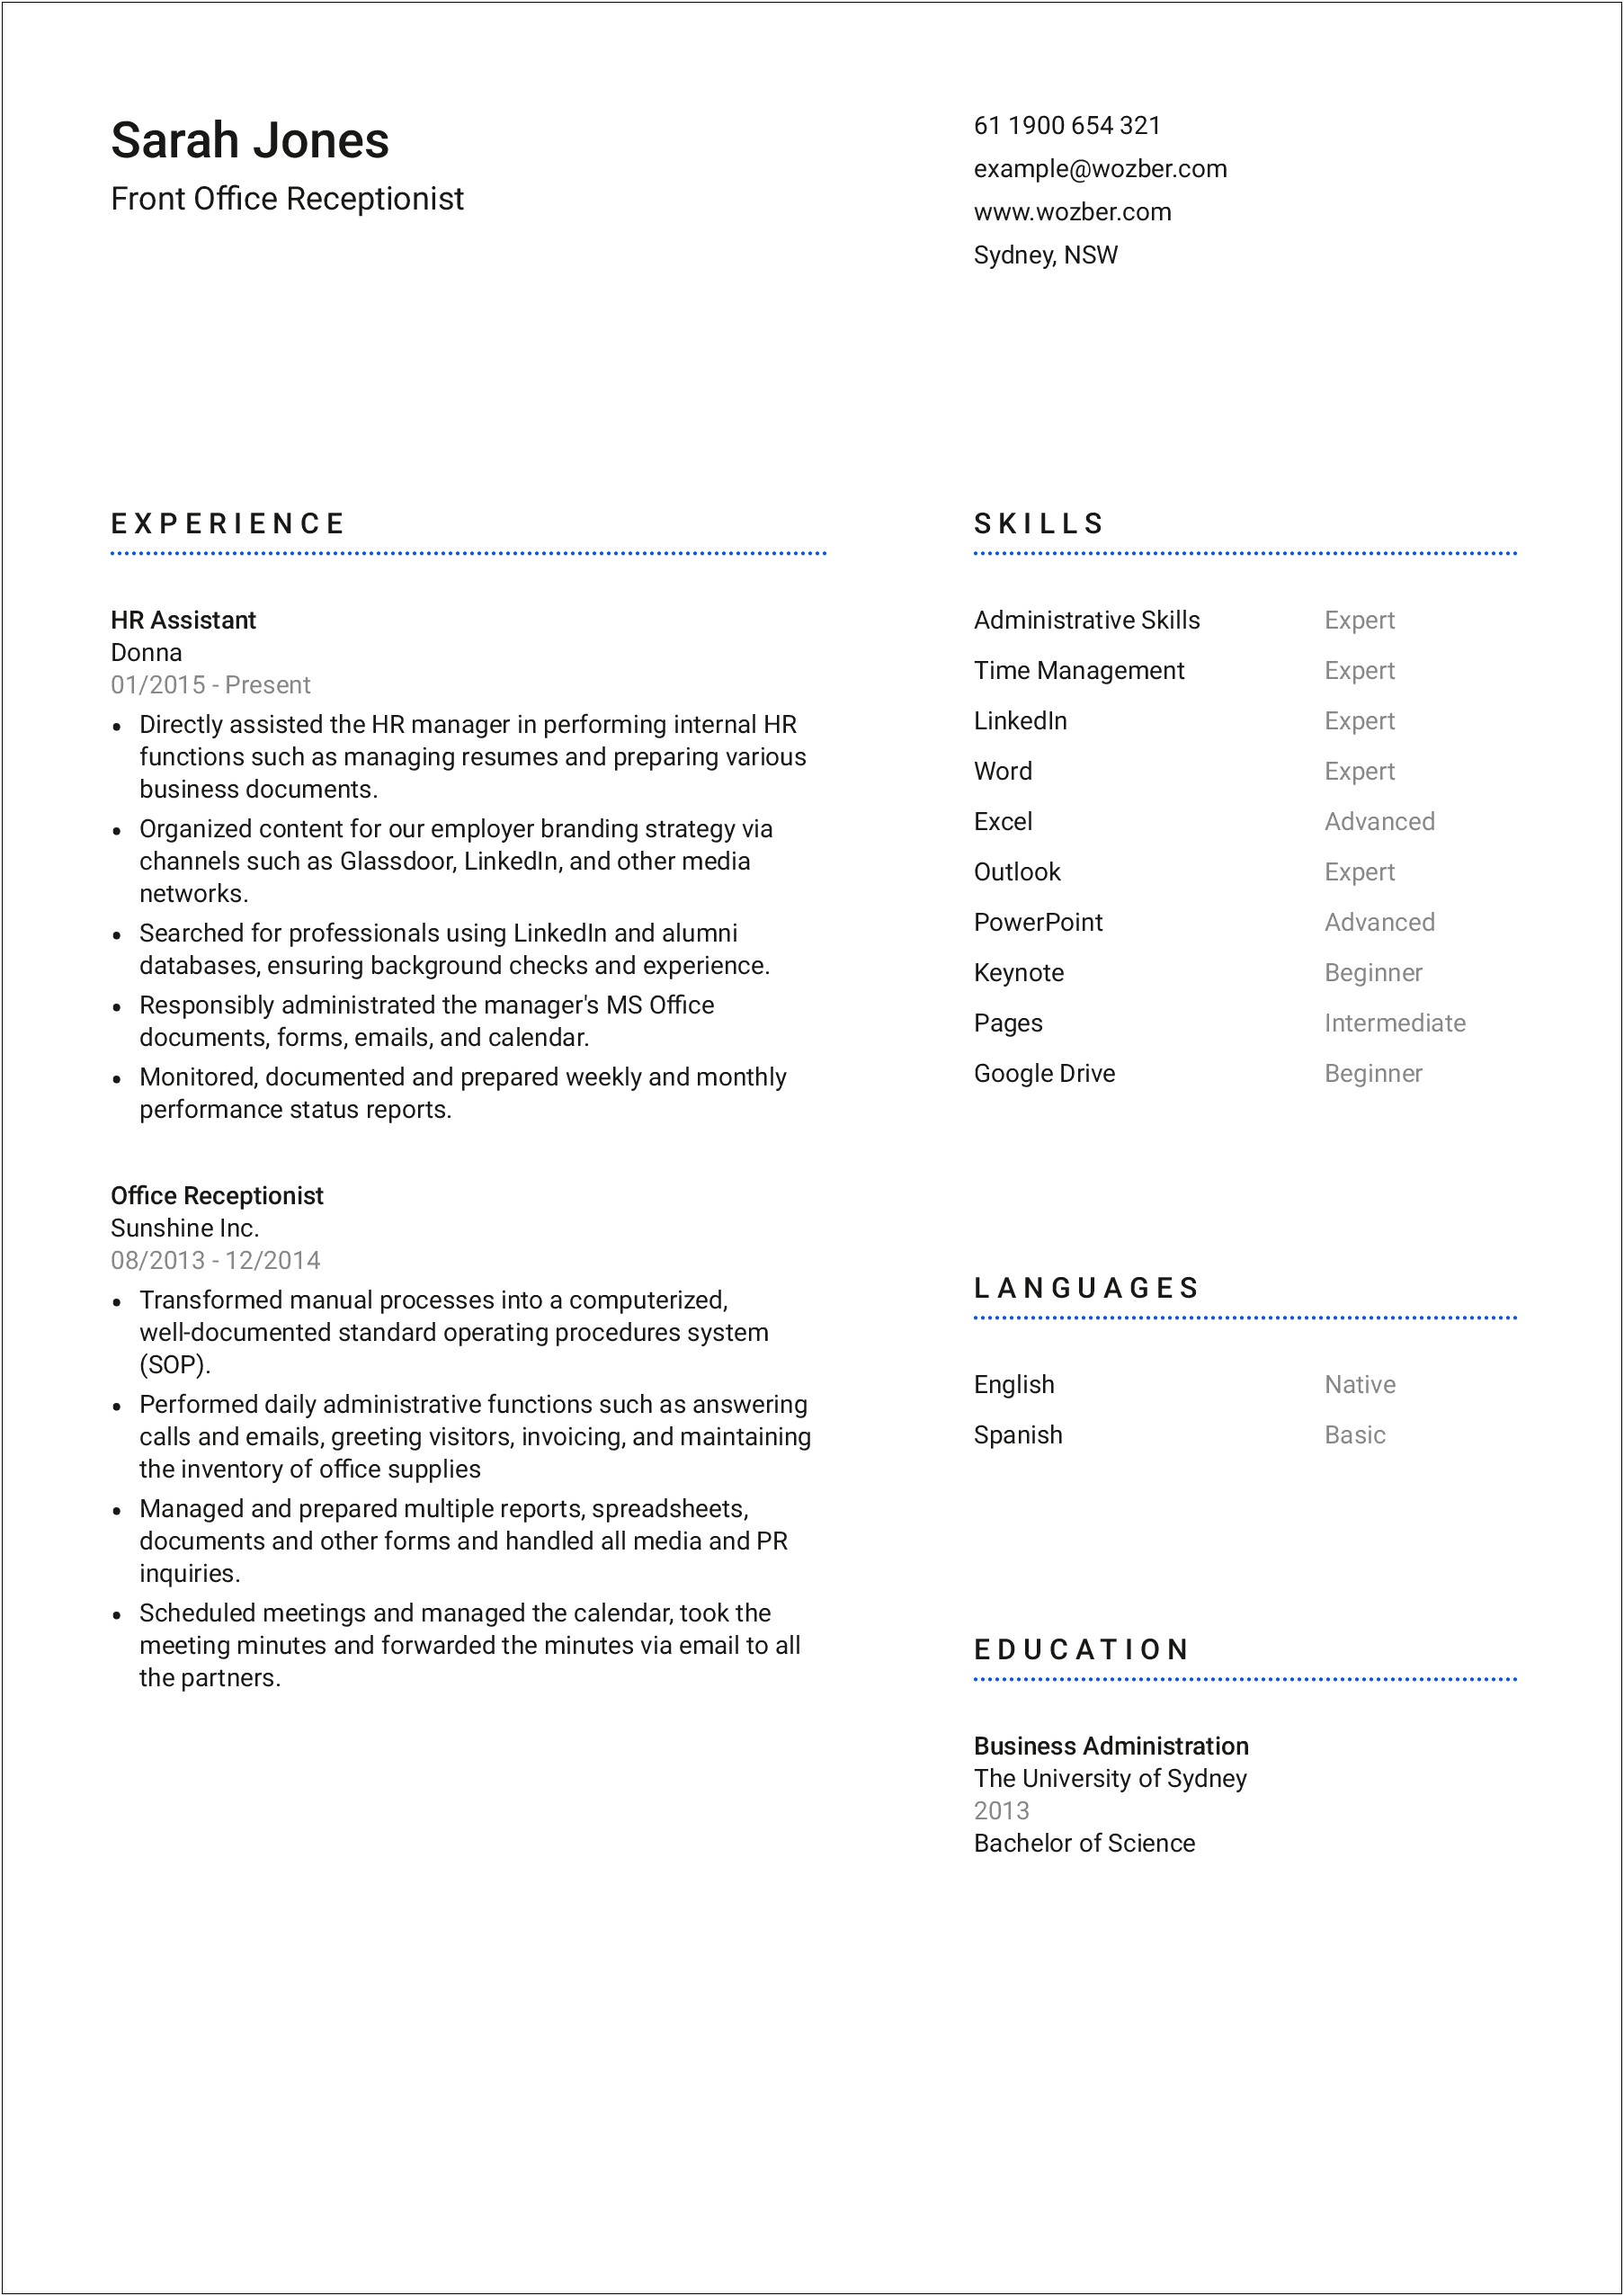 Sample Resume With Multiple Jobs